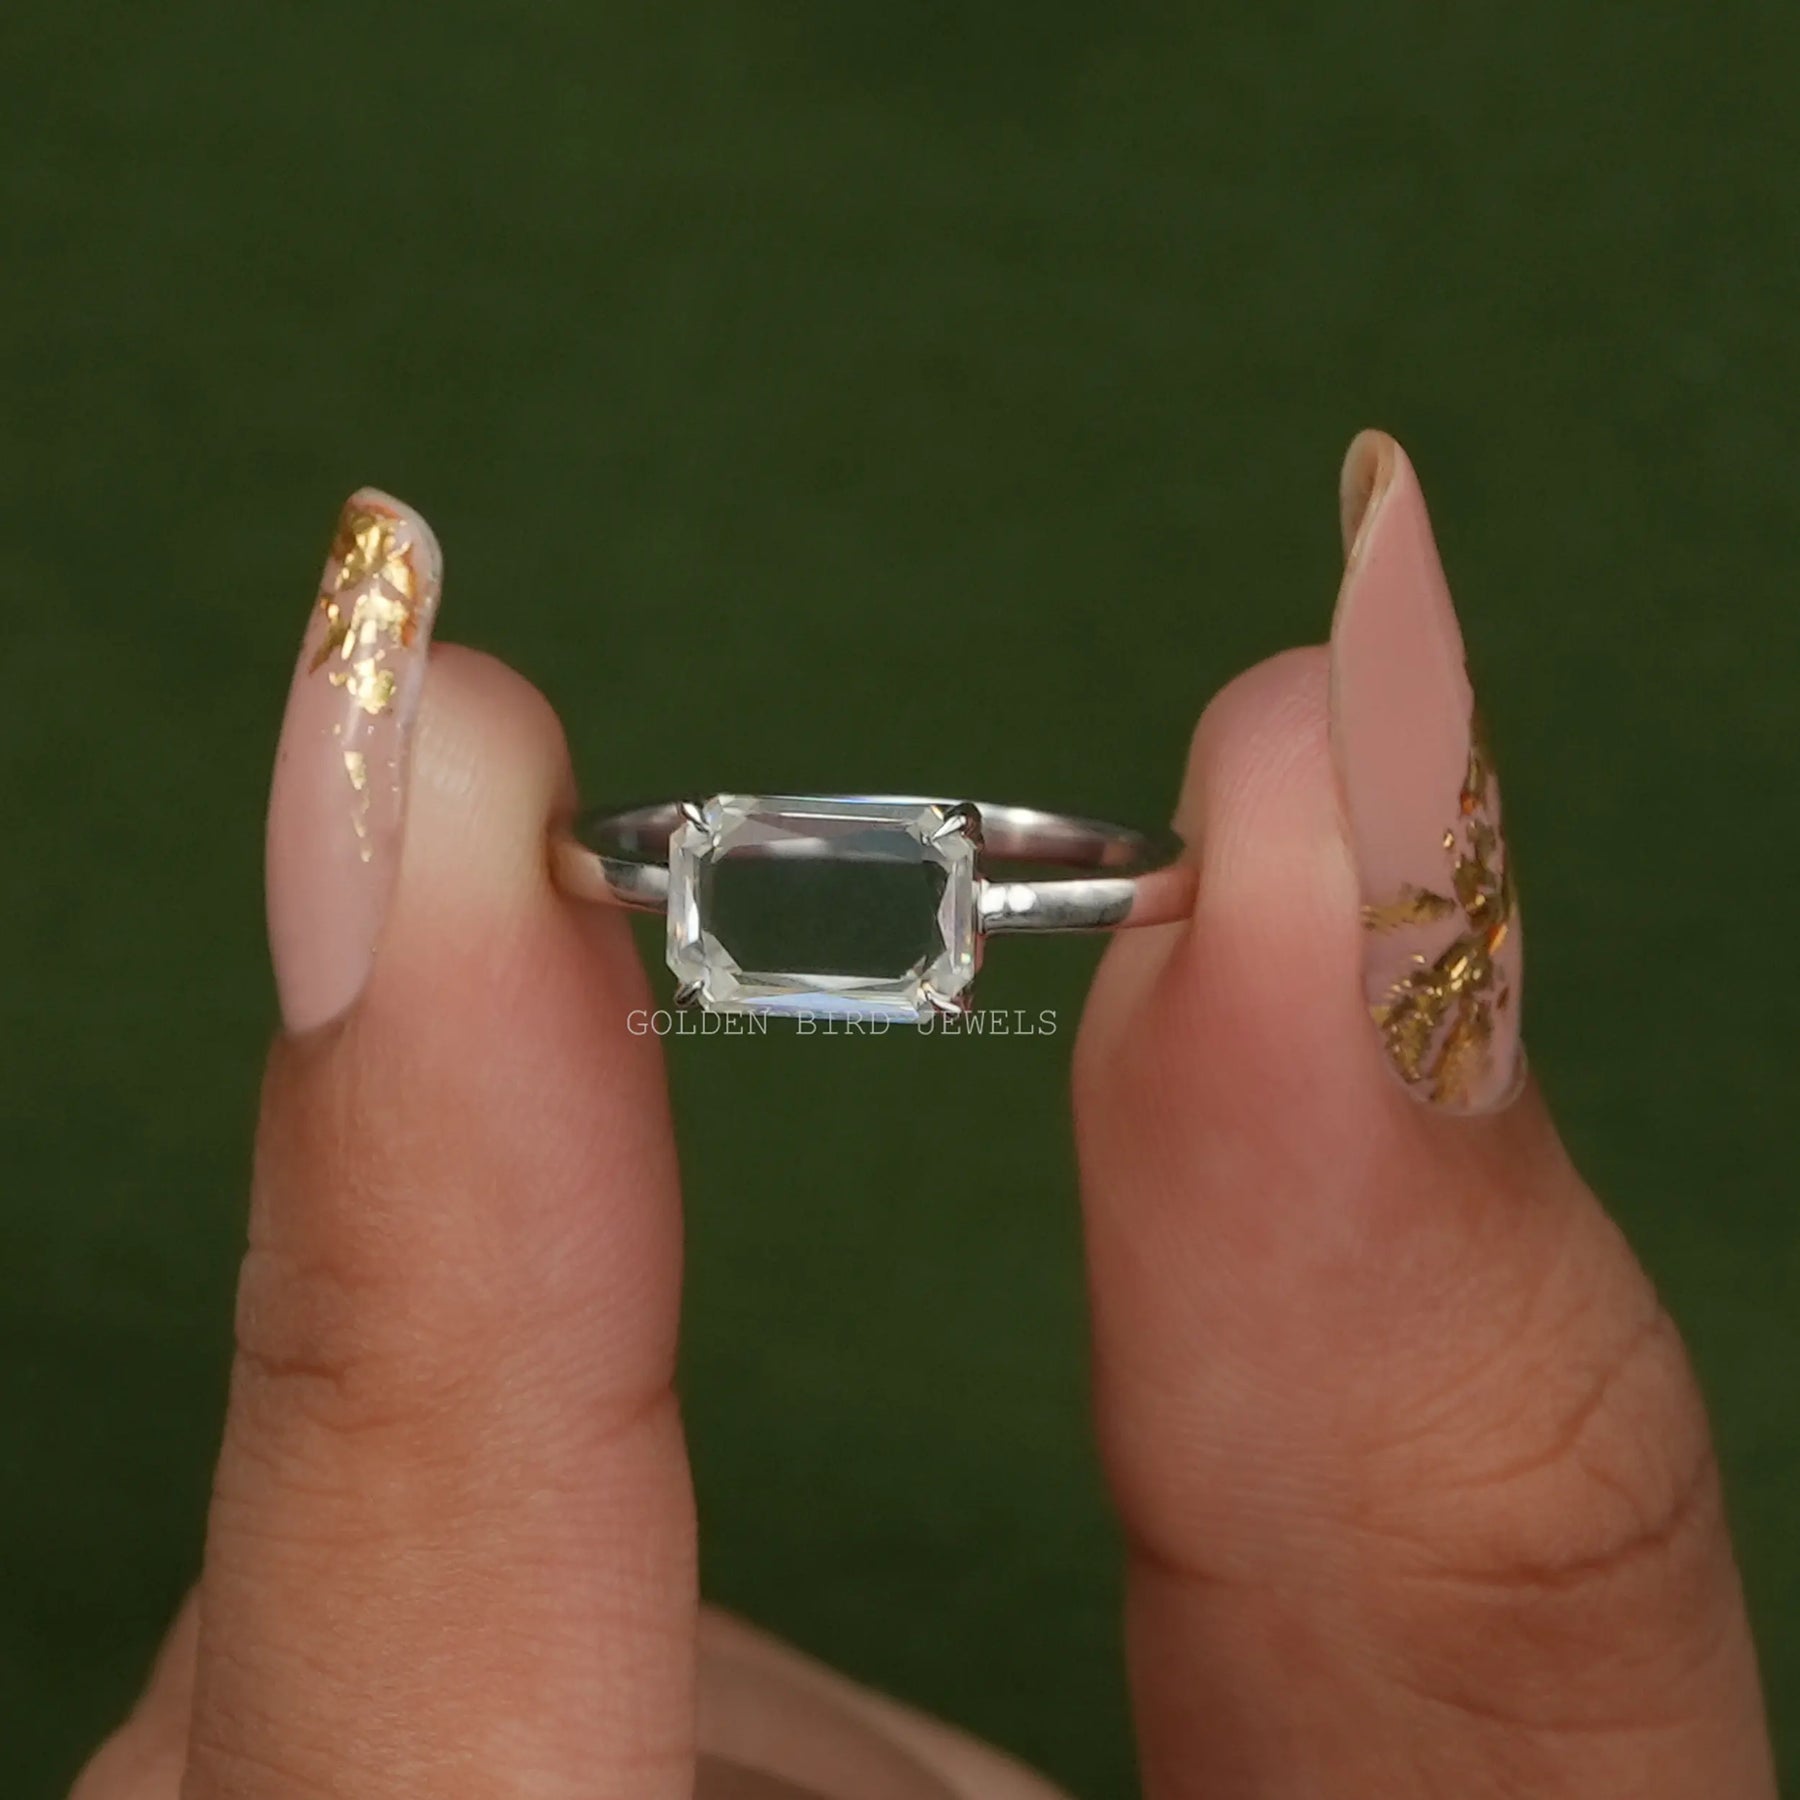 [Front view of portrait cut radiant cut solitaire ring made of white gold]-[Golden Bird Jewels]